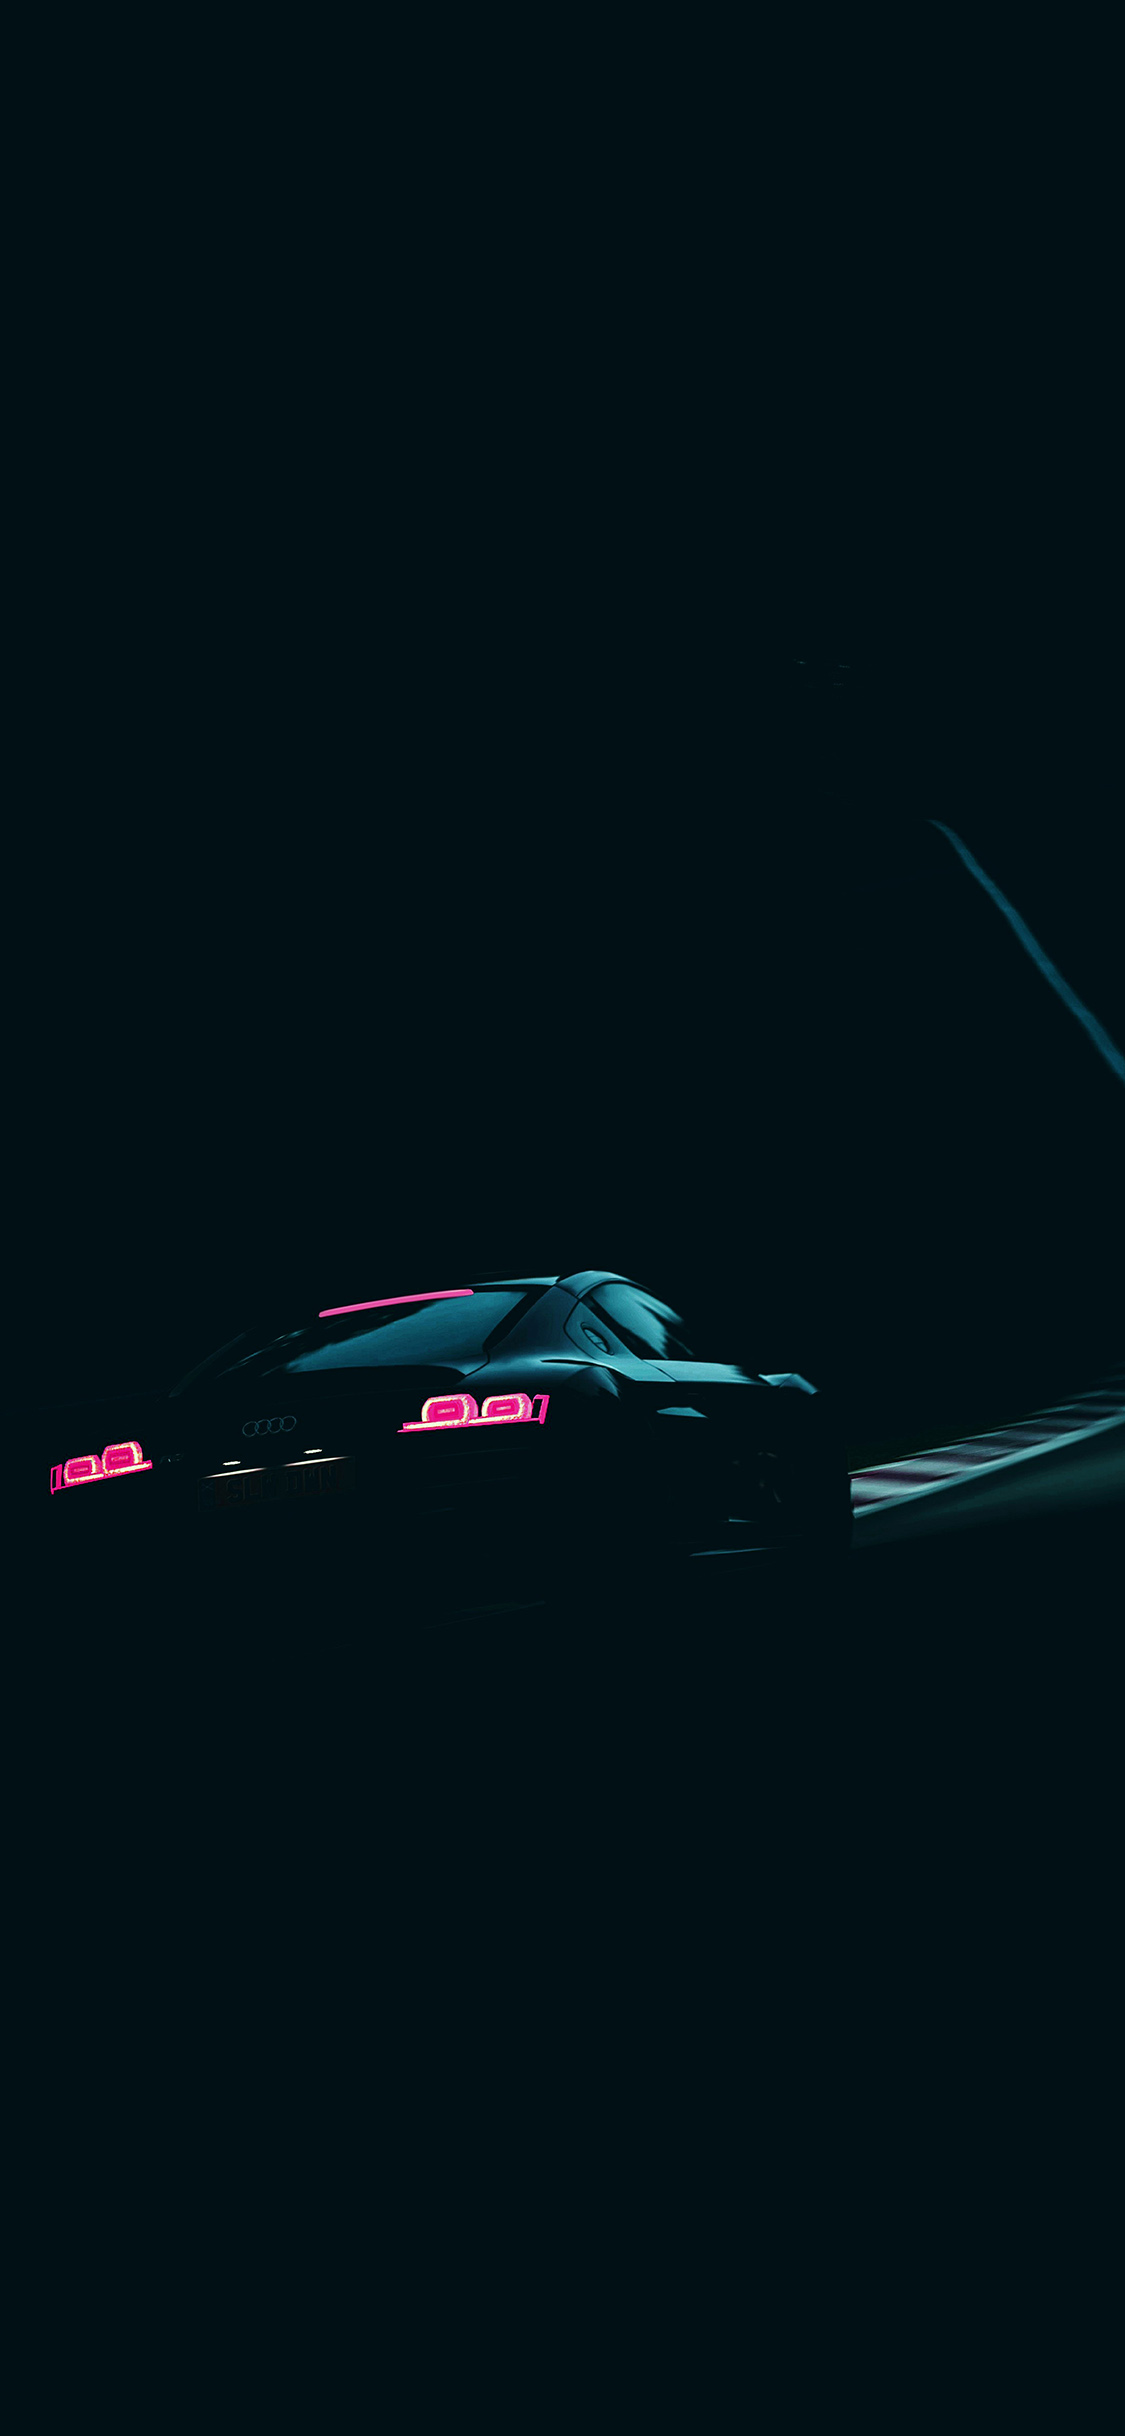 Cars Wallpapers For Iphone X Iphonexpapers - 4k Wallpaper For Iphone Xs Max - HD Wallpaper 